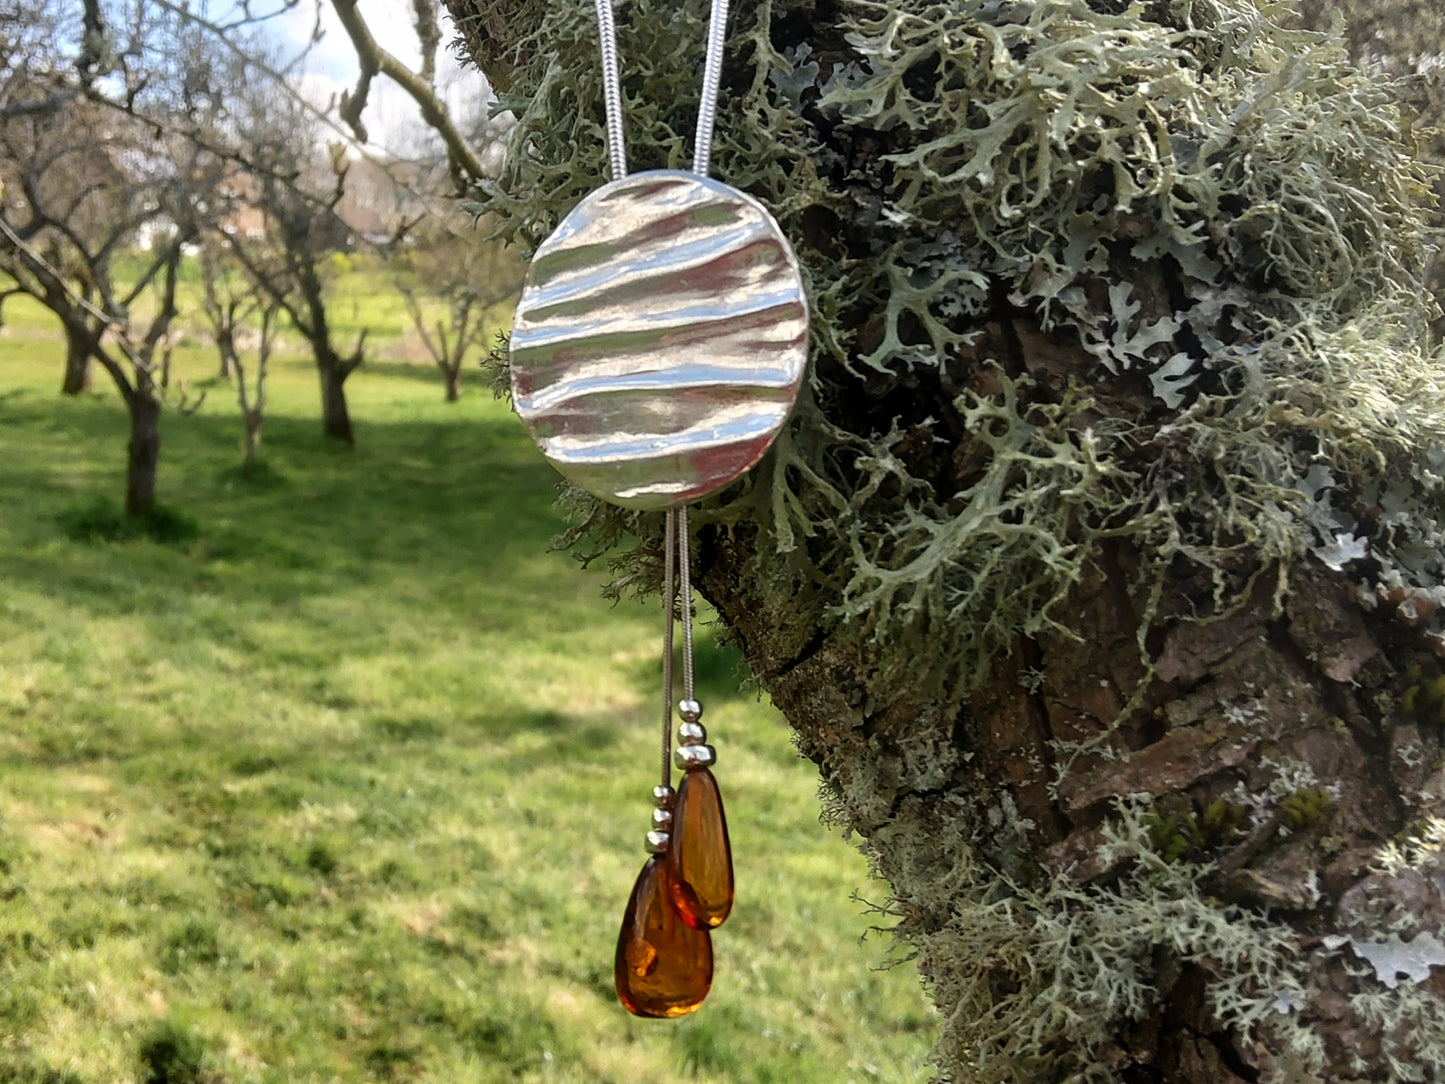 Textured sterling silver handmade pendant with amber beads